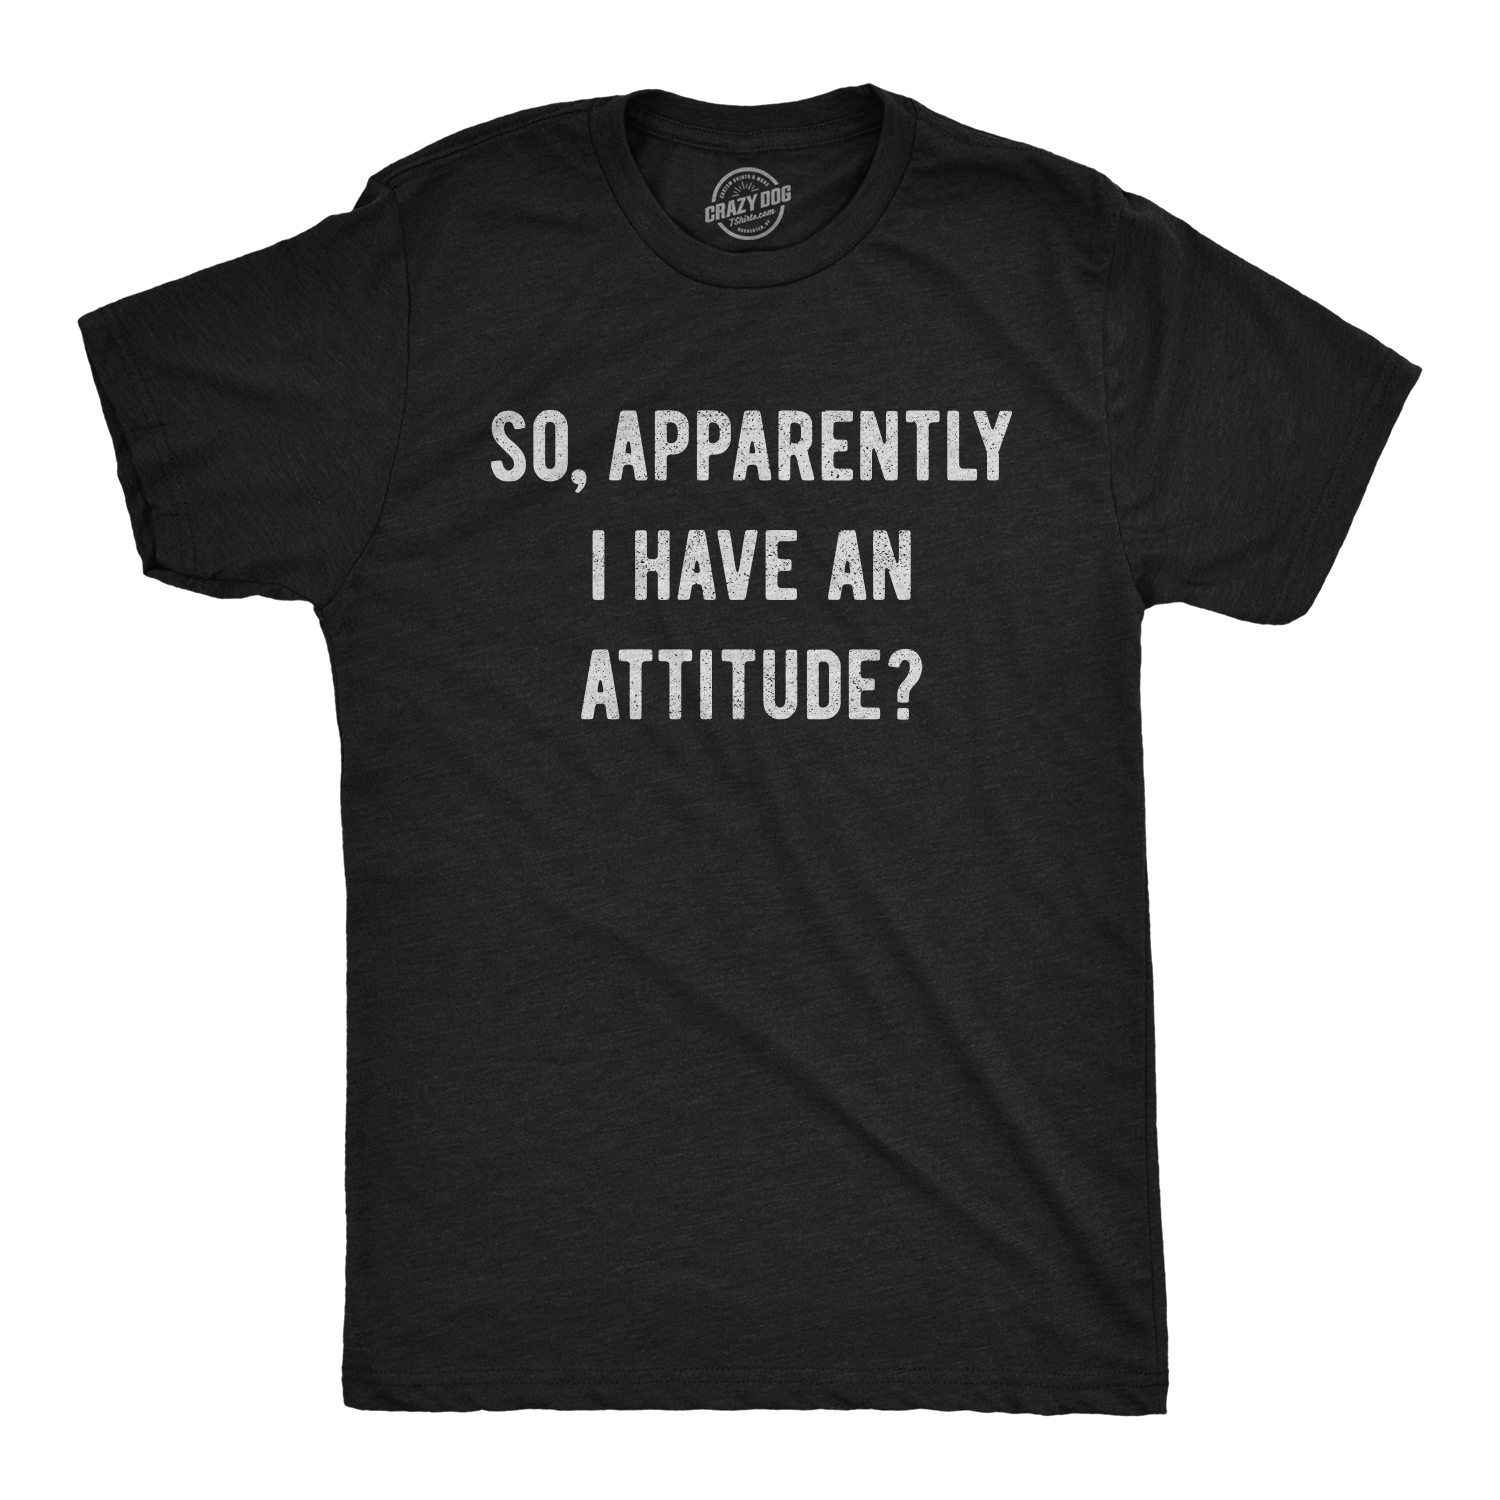 Crazy Dog Tshirts Mens So Apparently I Have An Attitude T shirt Funny Sayings Sarcastic Tee